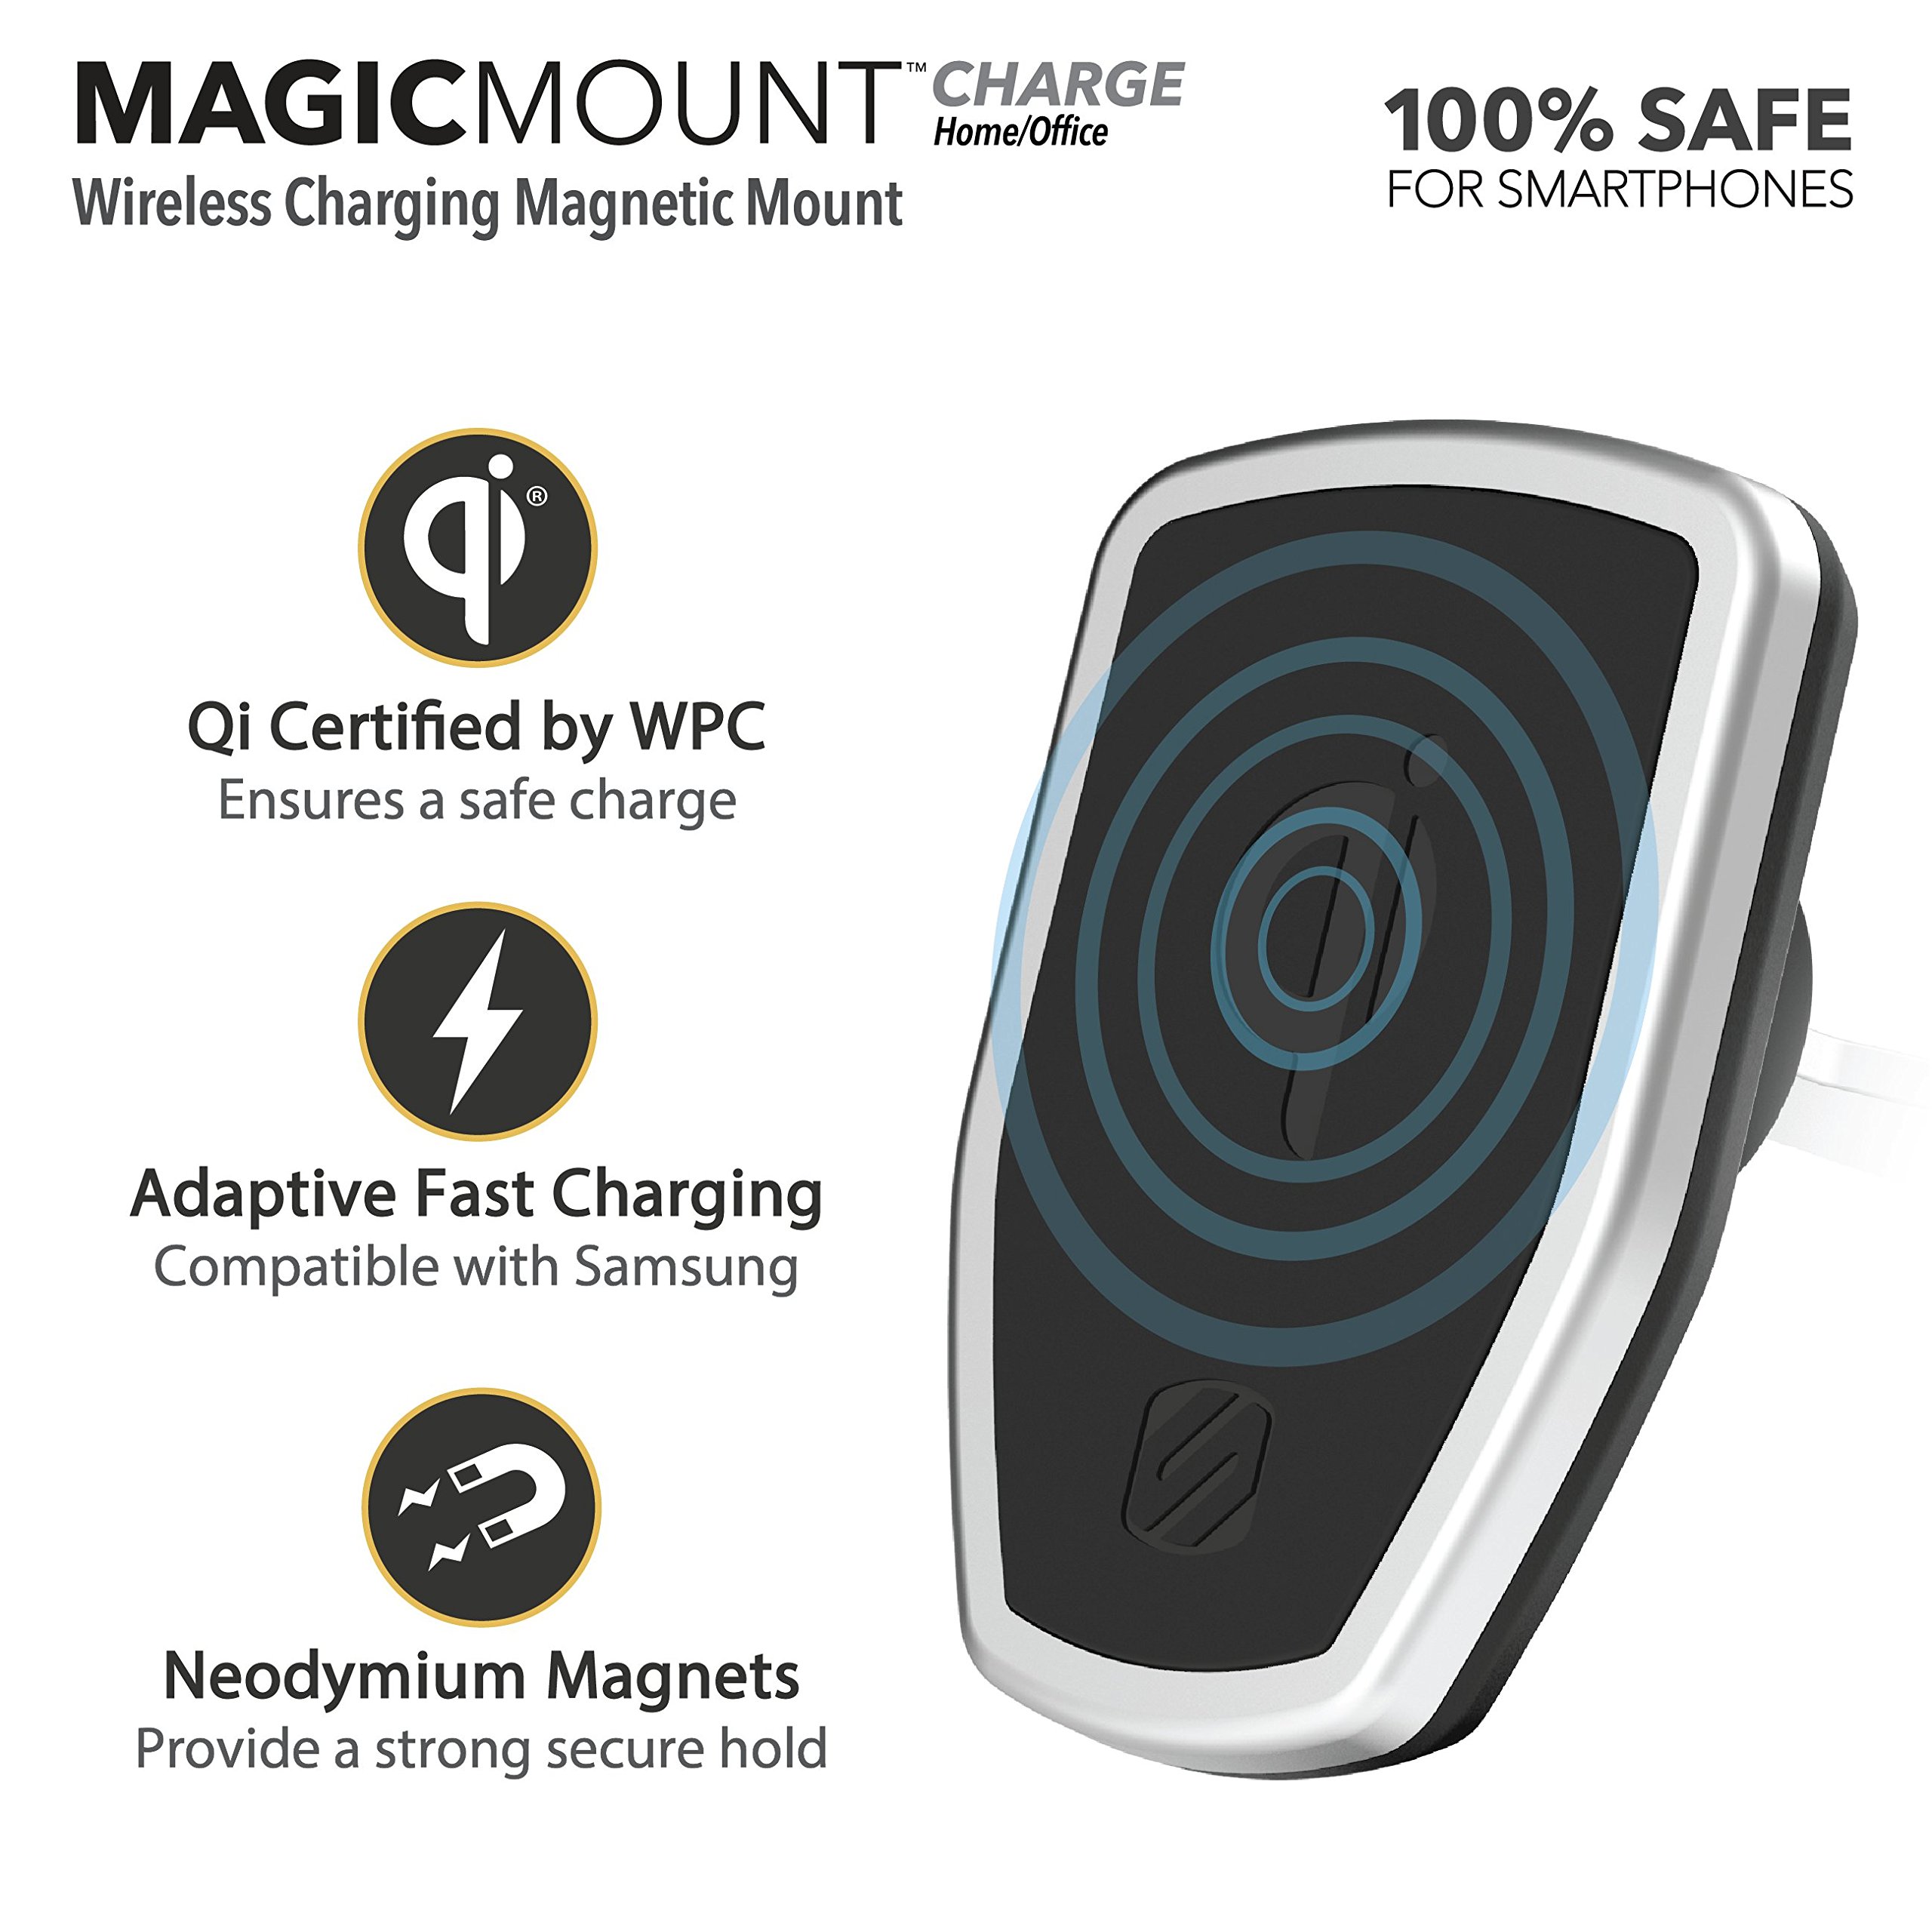 SCOSCHE MPQOHM MagicMount Pro Charge Qi-Certified Wireless Charging Magnetic Mount for the Home or Office